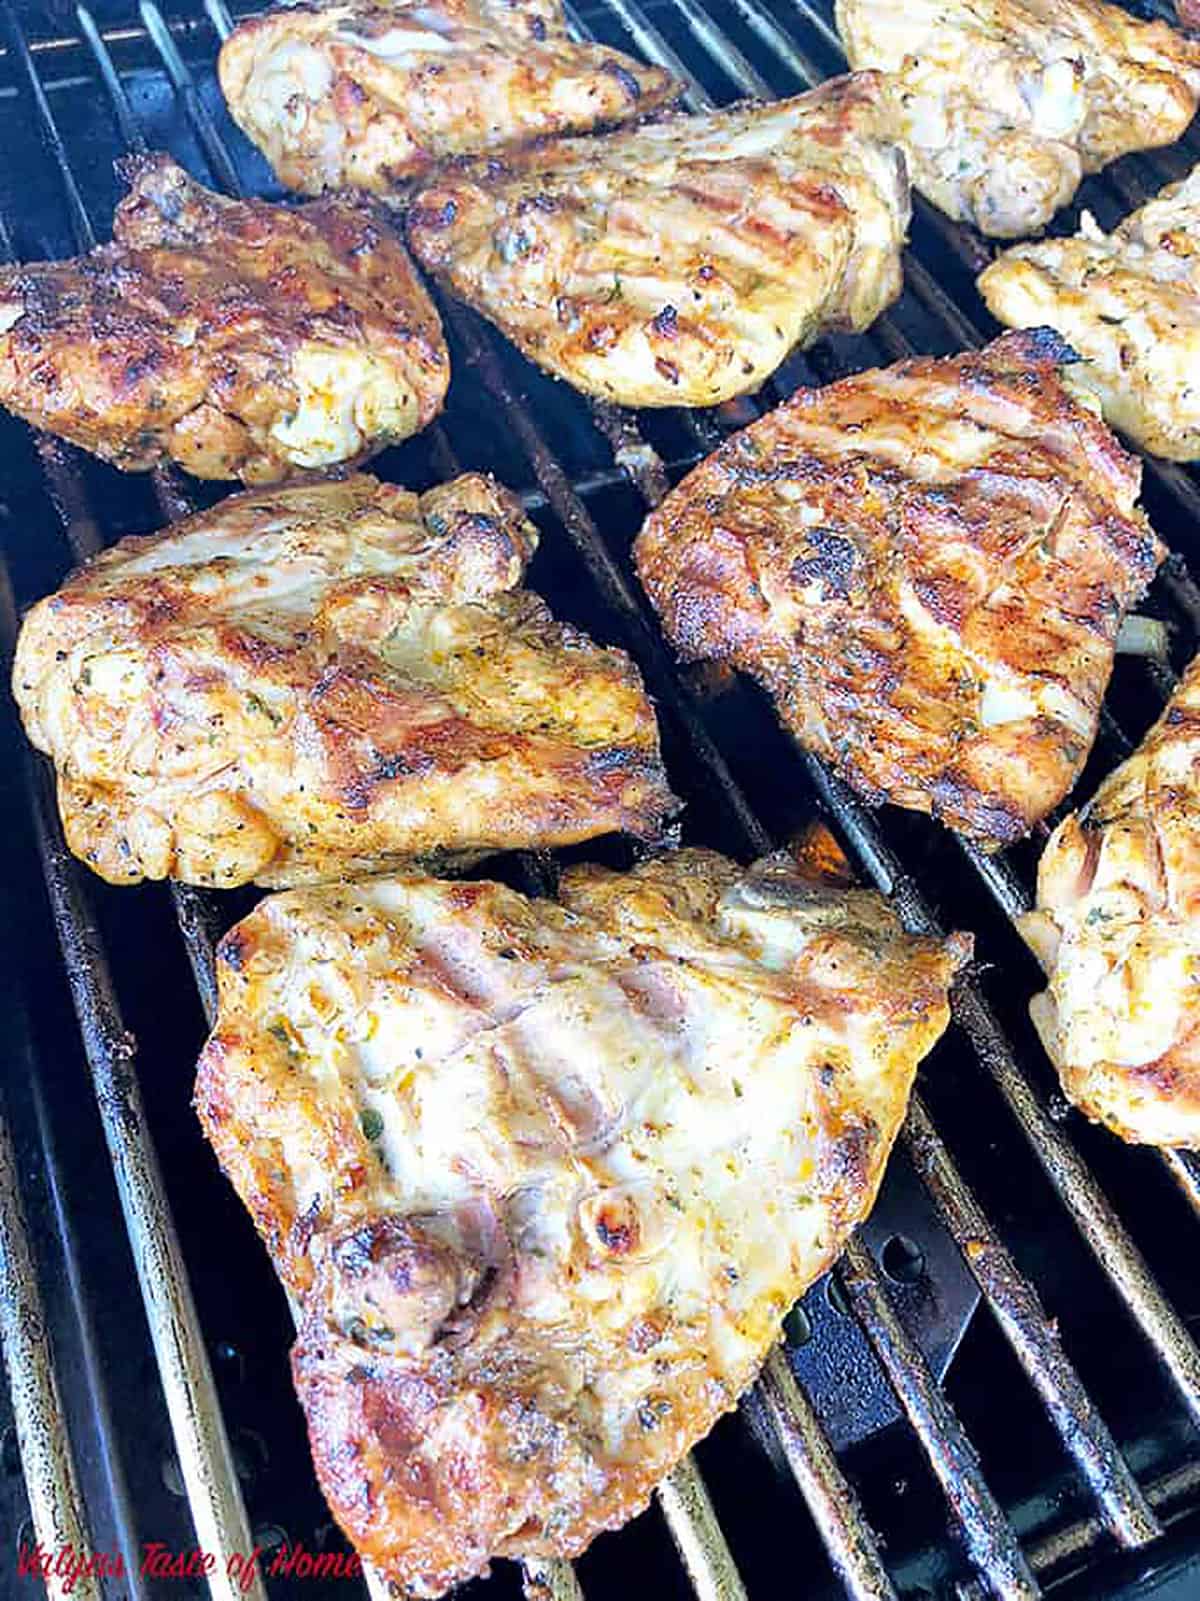 Flip the chicken thighs over to the other side and grill them for an additional 10 – 15 minutes or until cooked thoroughly.